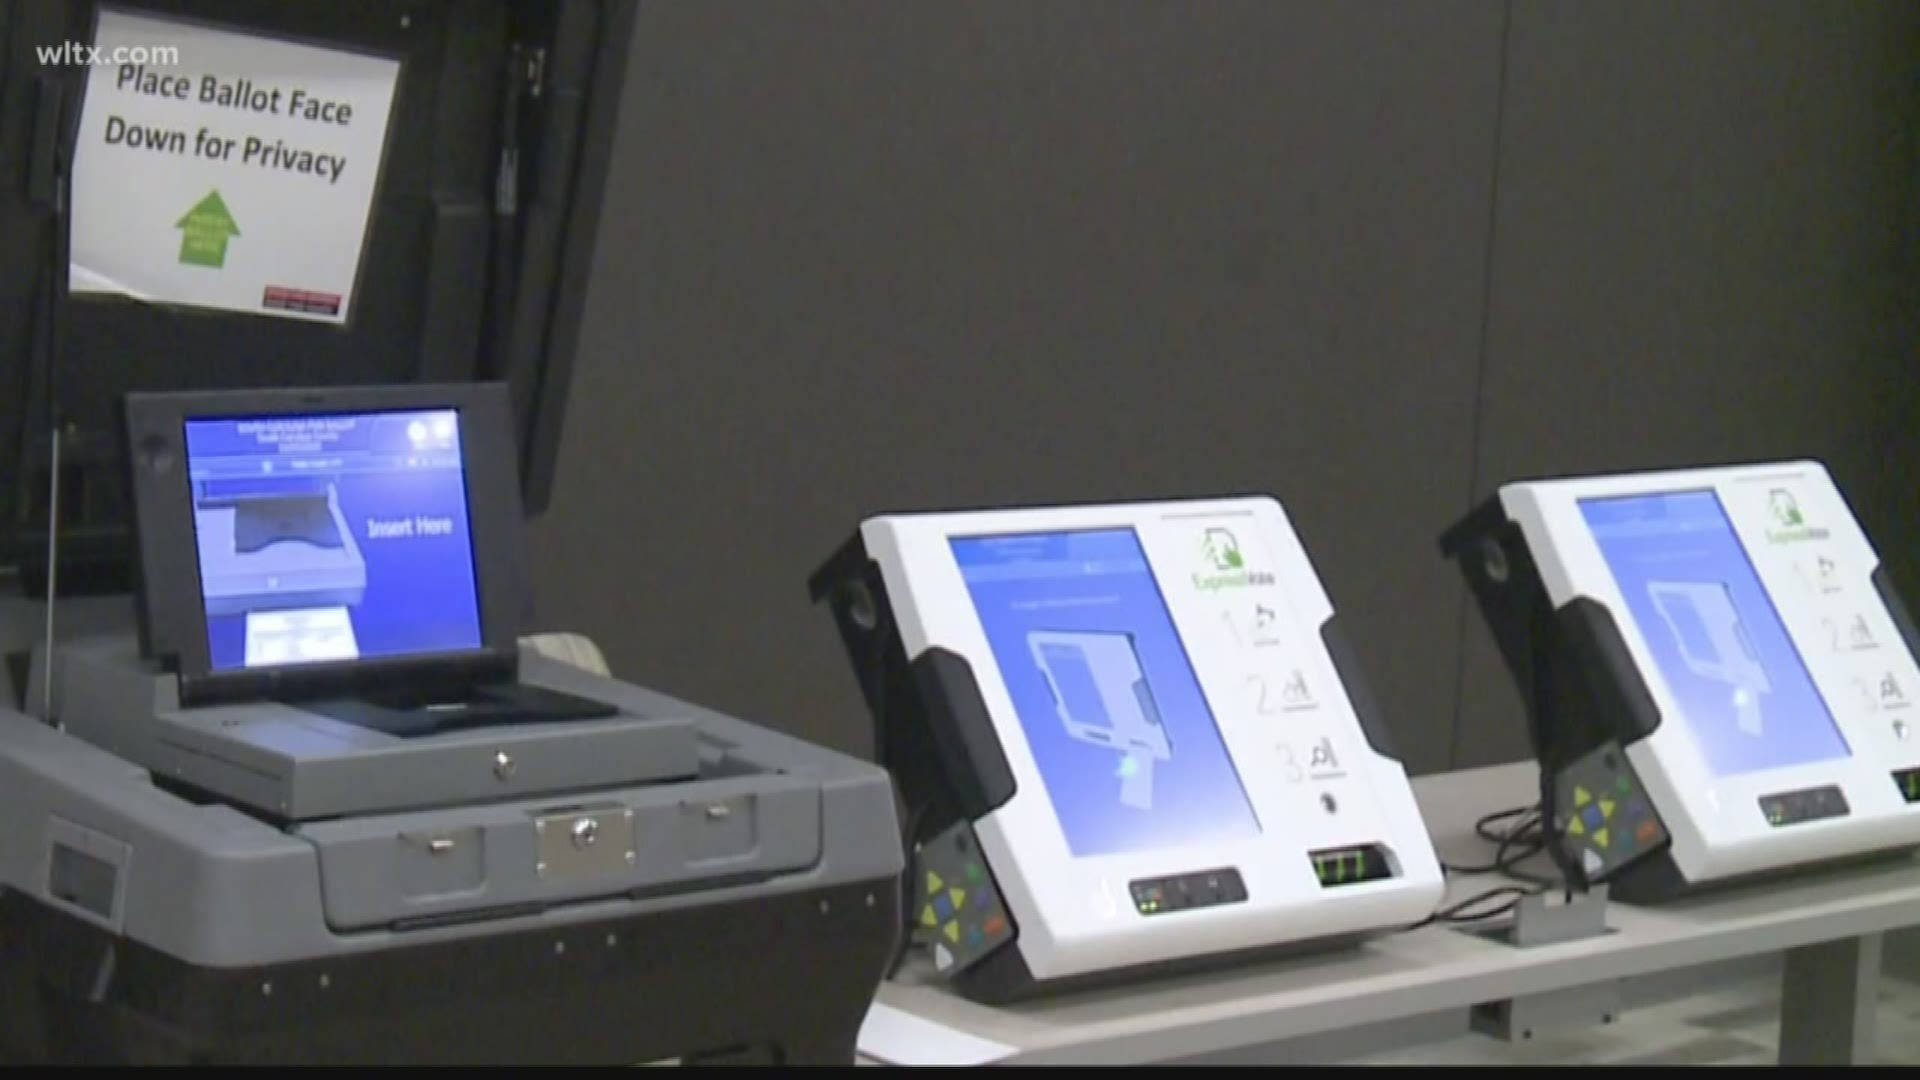 Richland County Election leaders say they missed 74 absentee votes in Saturday's democratic primary.
The ballots were found in envelopes which had been opened.